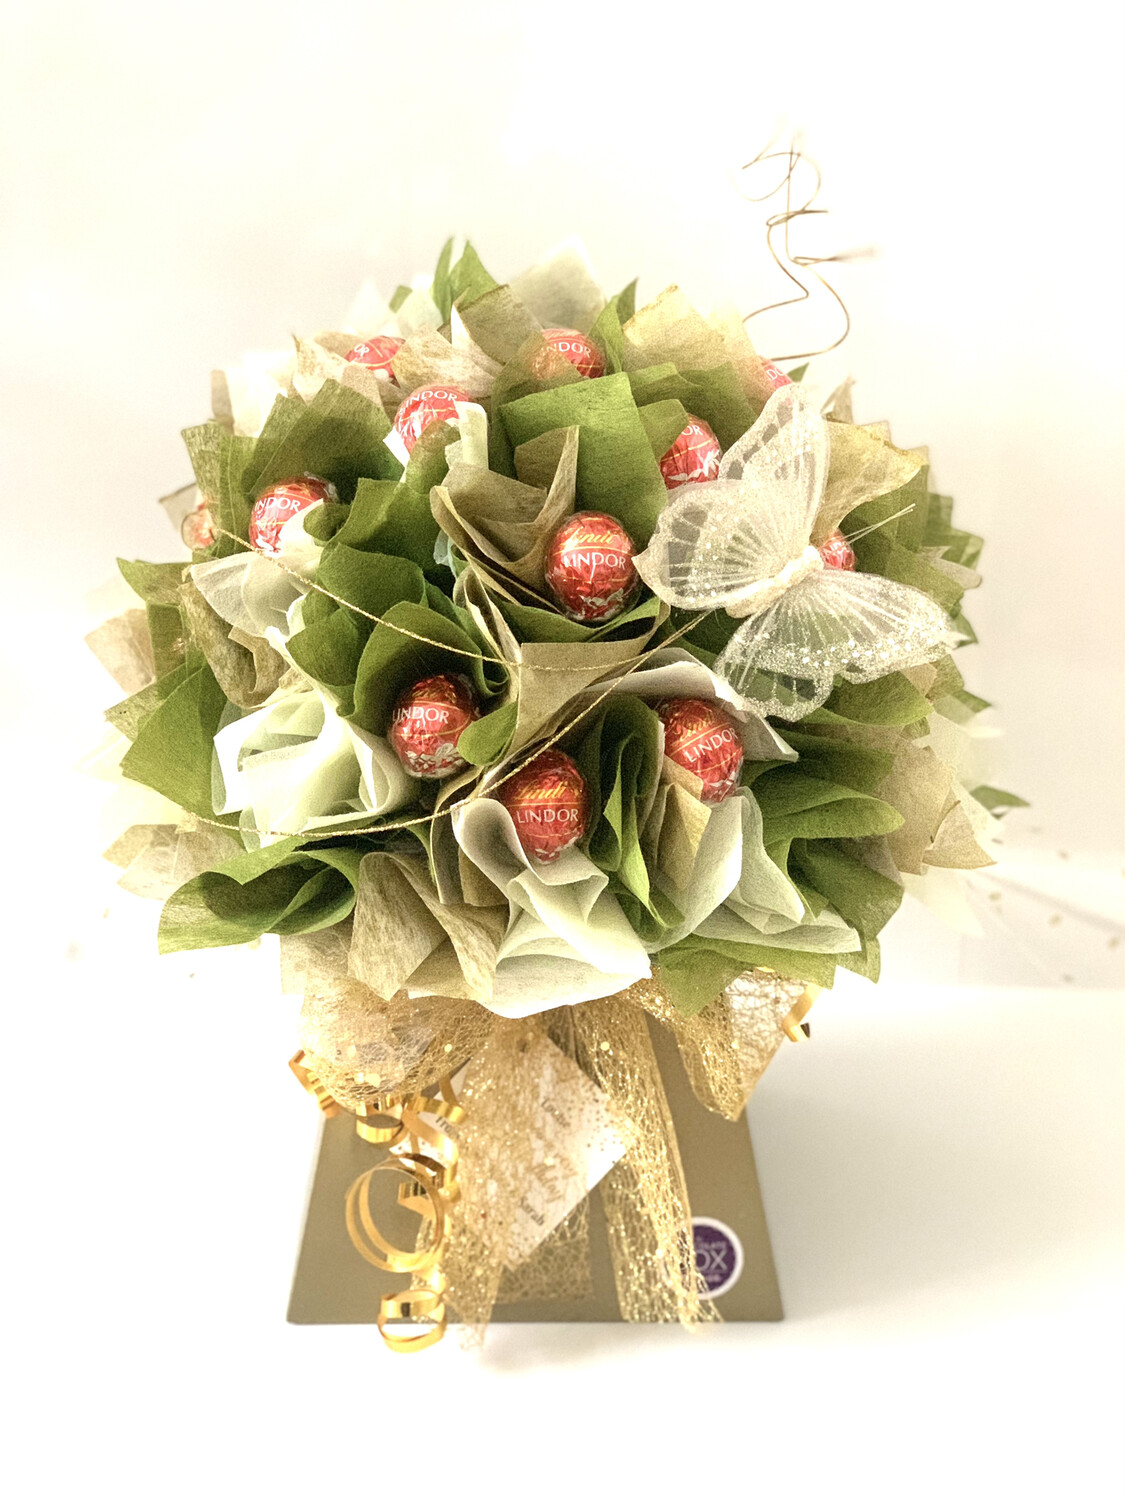 Deluxe Lindt Chocolate Bouquet - Gold, Green and Cream